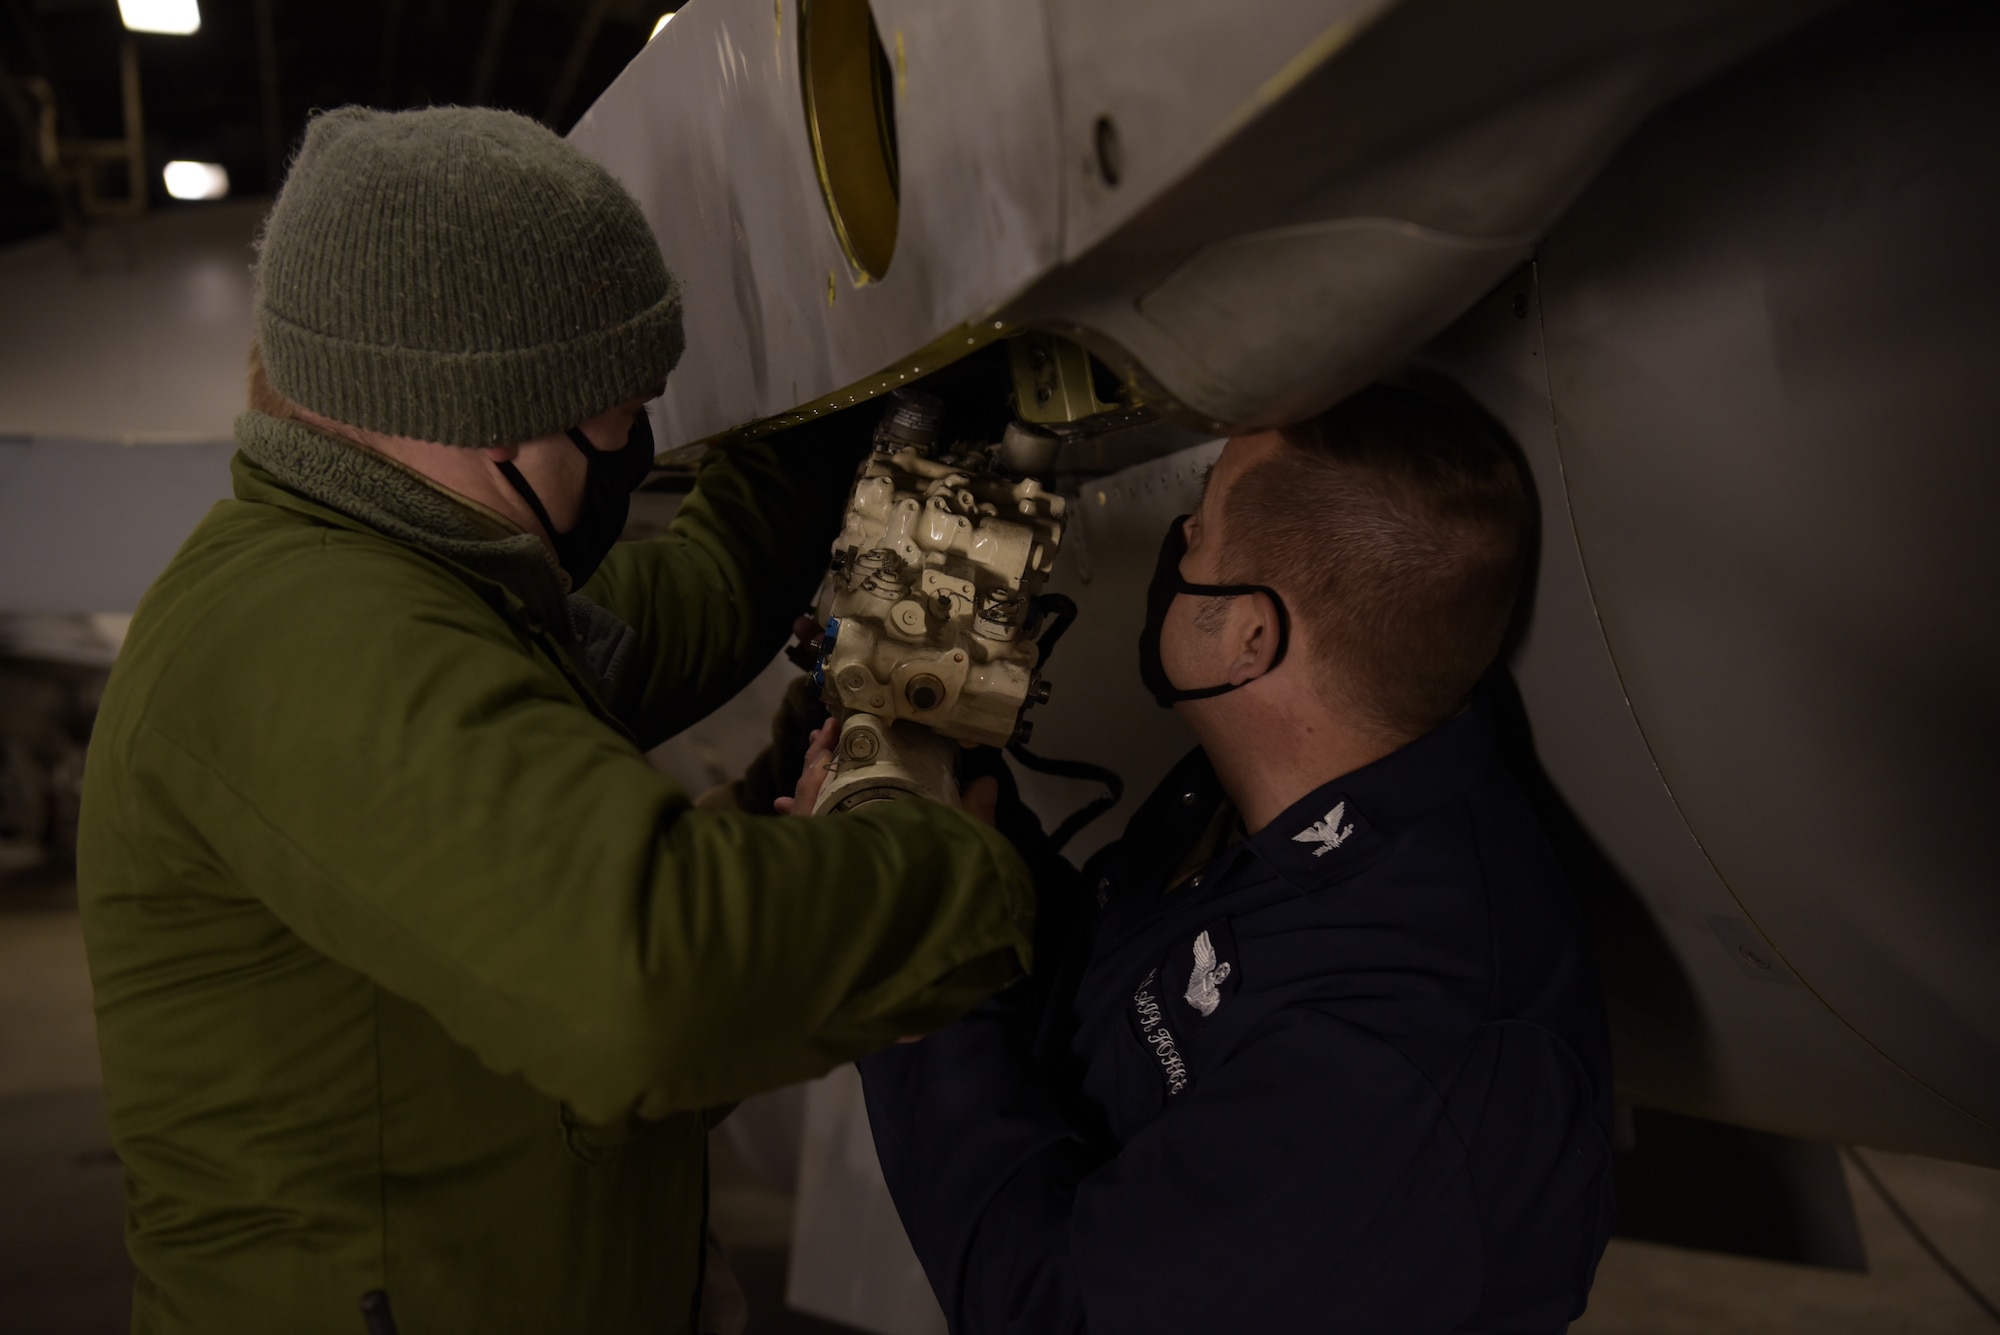 U.S. Air Force Tech. Sgt. Mark Ward, left, a 35th Aircraft Maintenance Squadron dedicated crew chief, instructs Col. Jesse J. Friedel, right, the 35th Fighter Wing commander, how to install a horizontal stabilizer actuator on an F-16 Fighting Falcon during a Wild Weasel Walk-Through at Misawa Air Base, Japan, Dec. 29, 2020. Wild Weasel Walk-Throughs are a weekly event directed by Friedel to learn more about the units he visits and listen to concerns. (U.S. Air Force photo by Airman 1st Class Joao Marcus Costa)